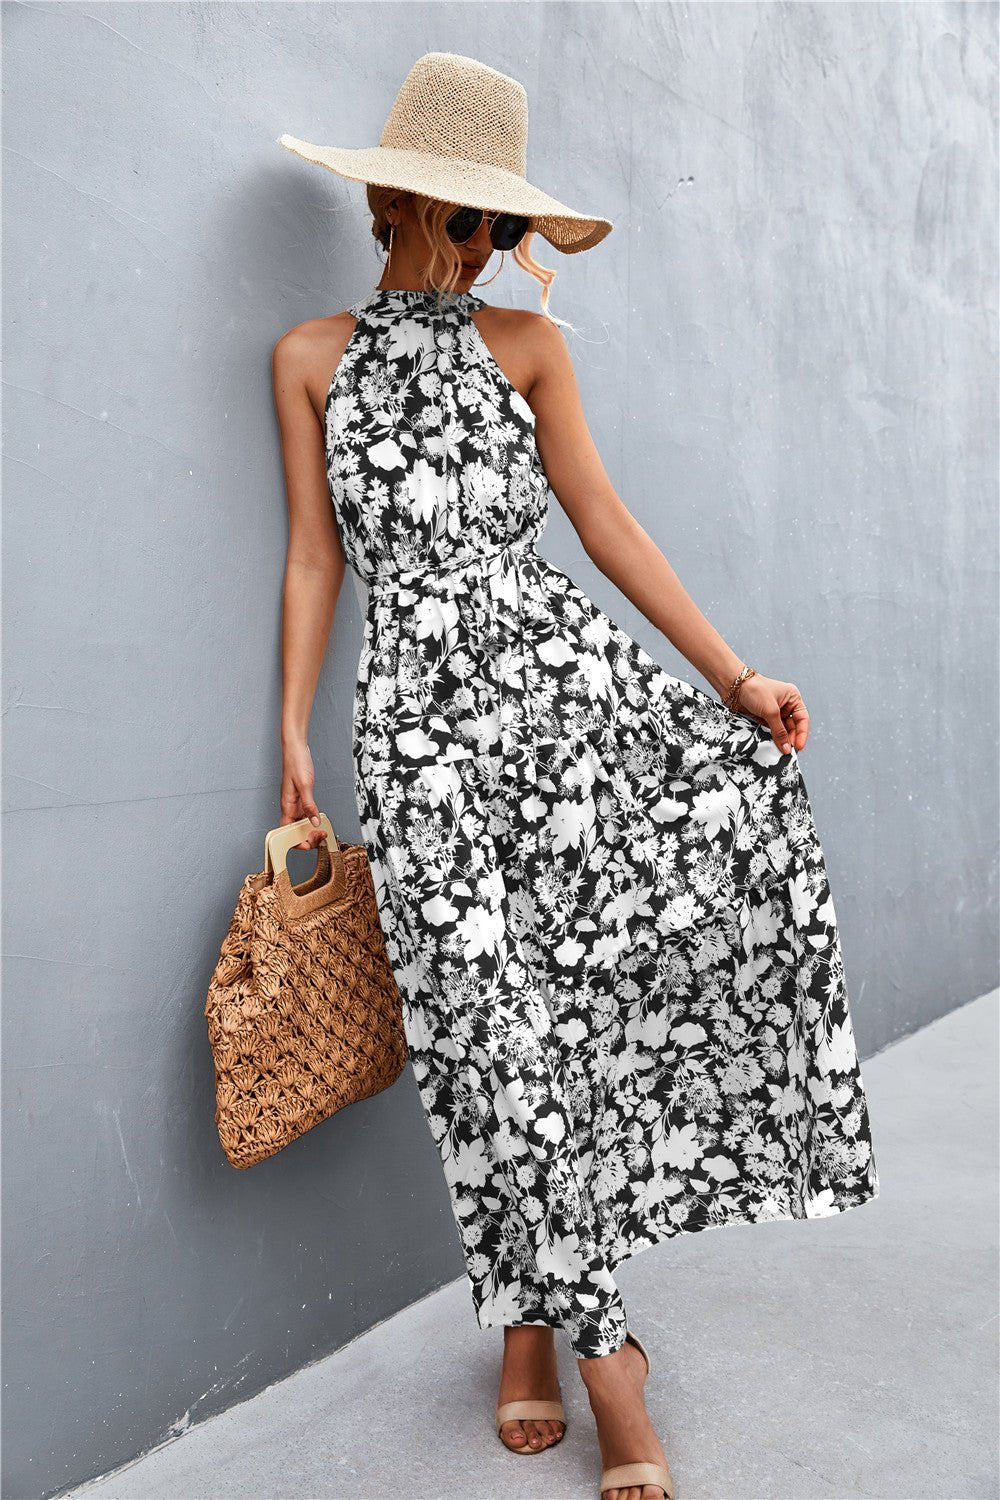 Let Me Remind You Printed Maxi Dress - black floral  maxi dress with halter neck and tie waist. #Firefly Lane Boutique1